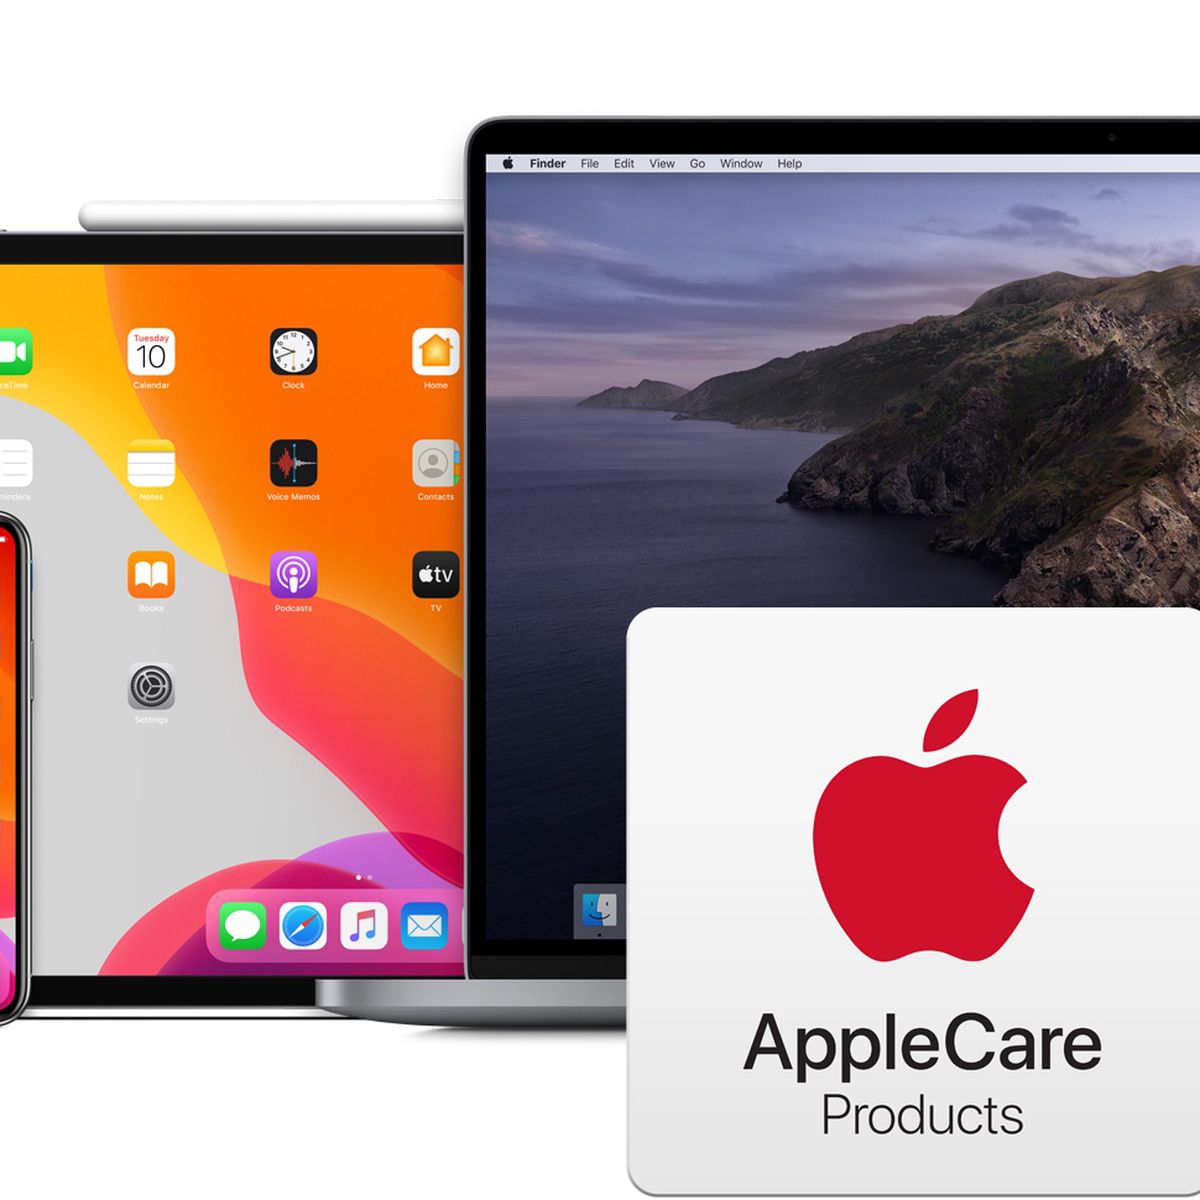 can i drop my mac at best buy for a apple care repair